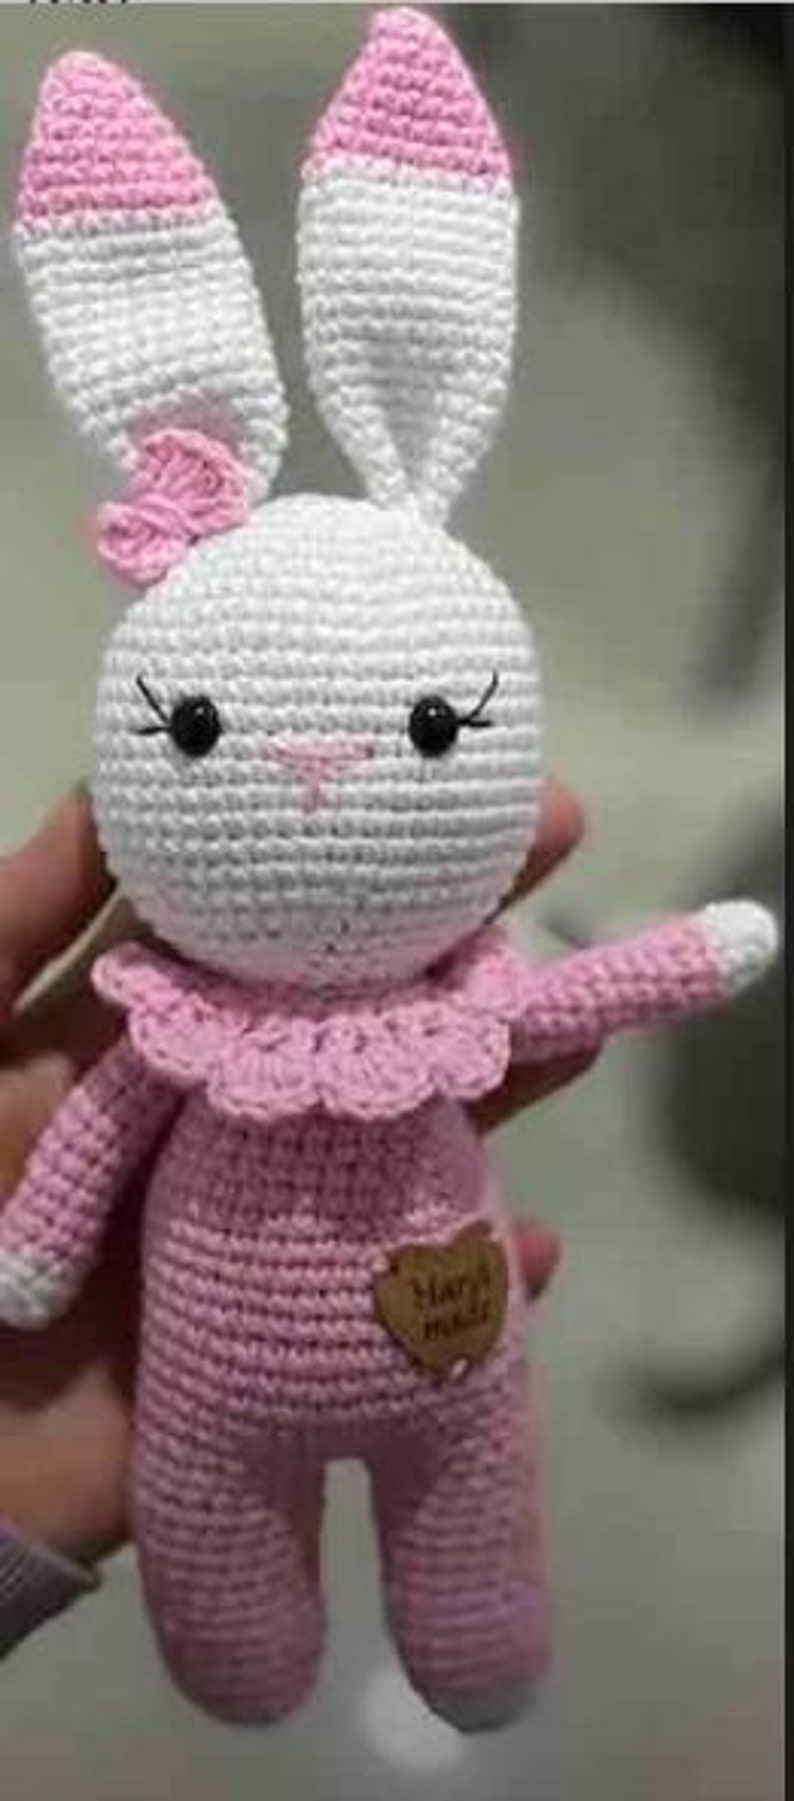 Cute Hand-Knitted Doll 22 cm Doll Handmade, Gift for Baby and Children, Amigurumi zdjęcie 3